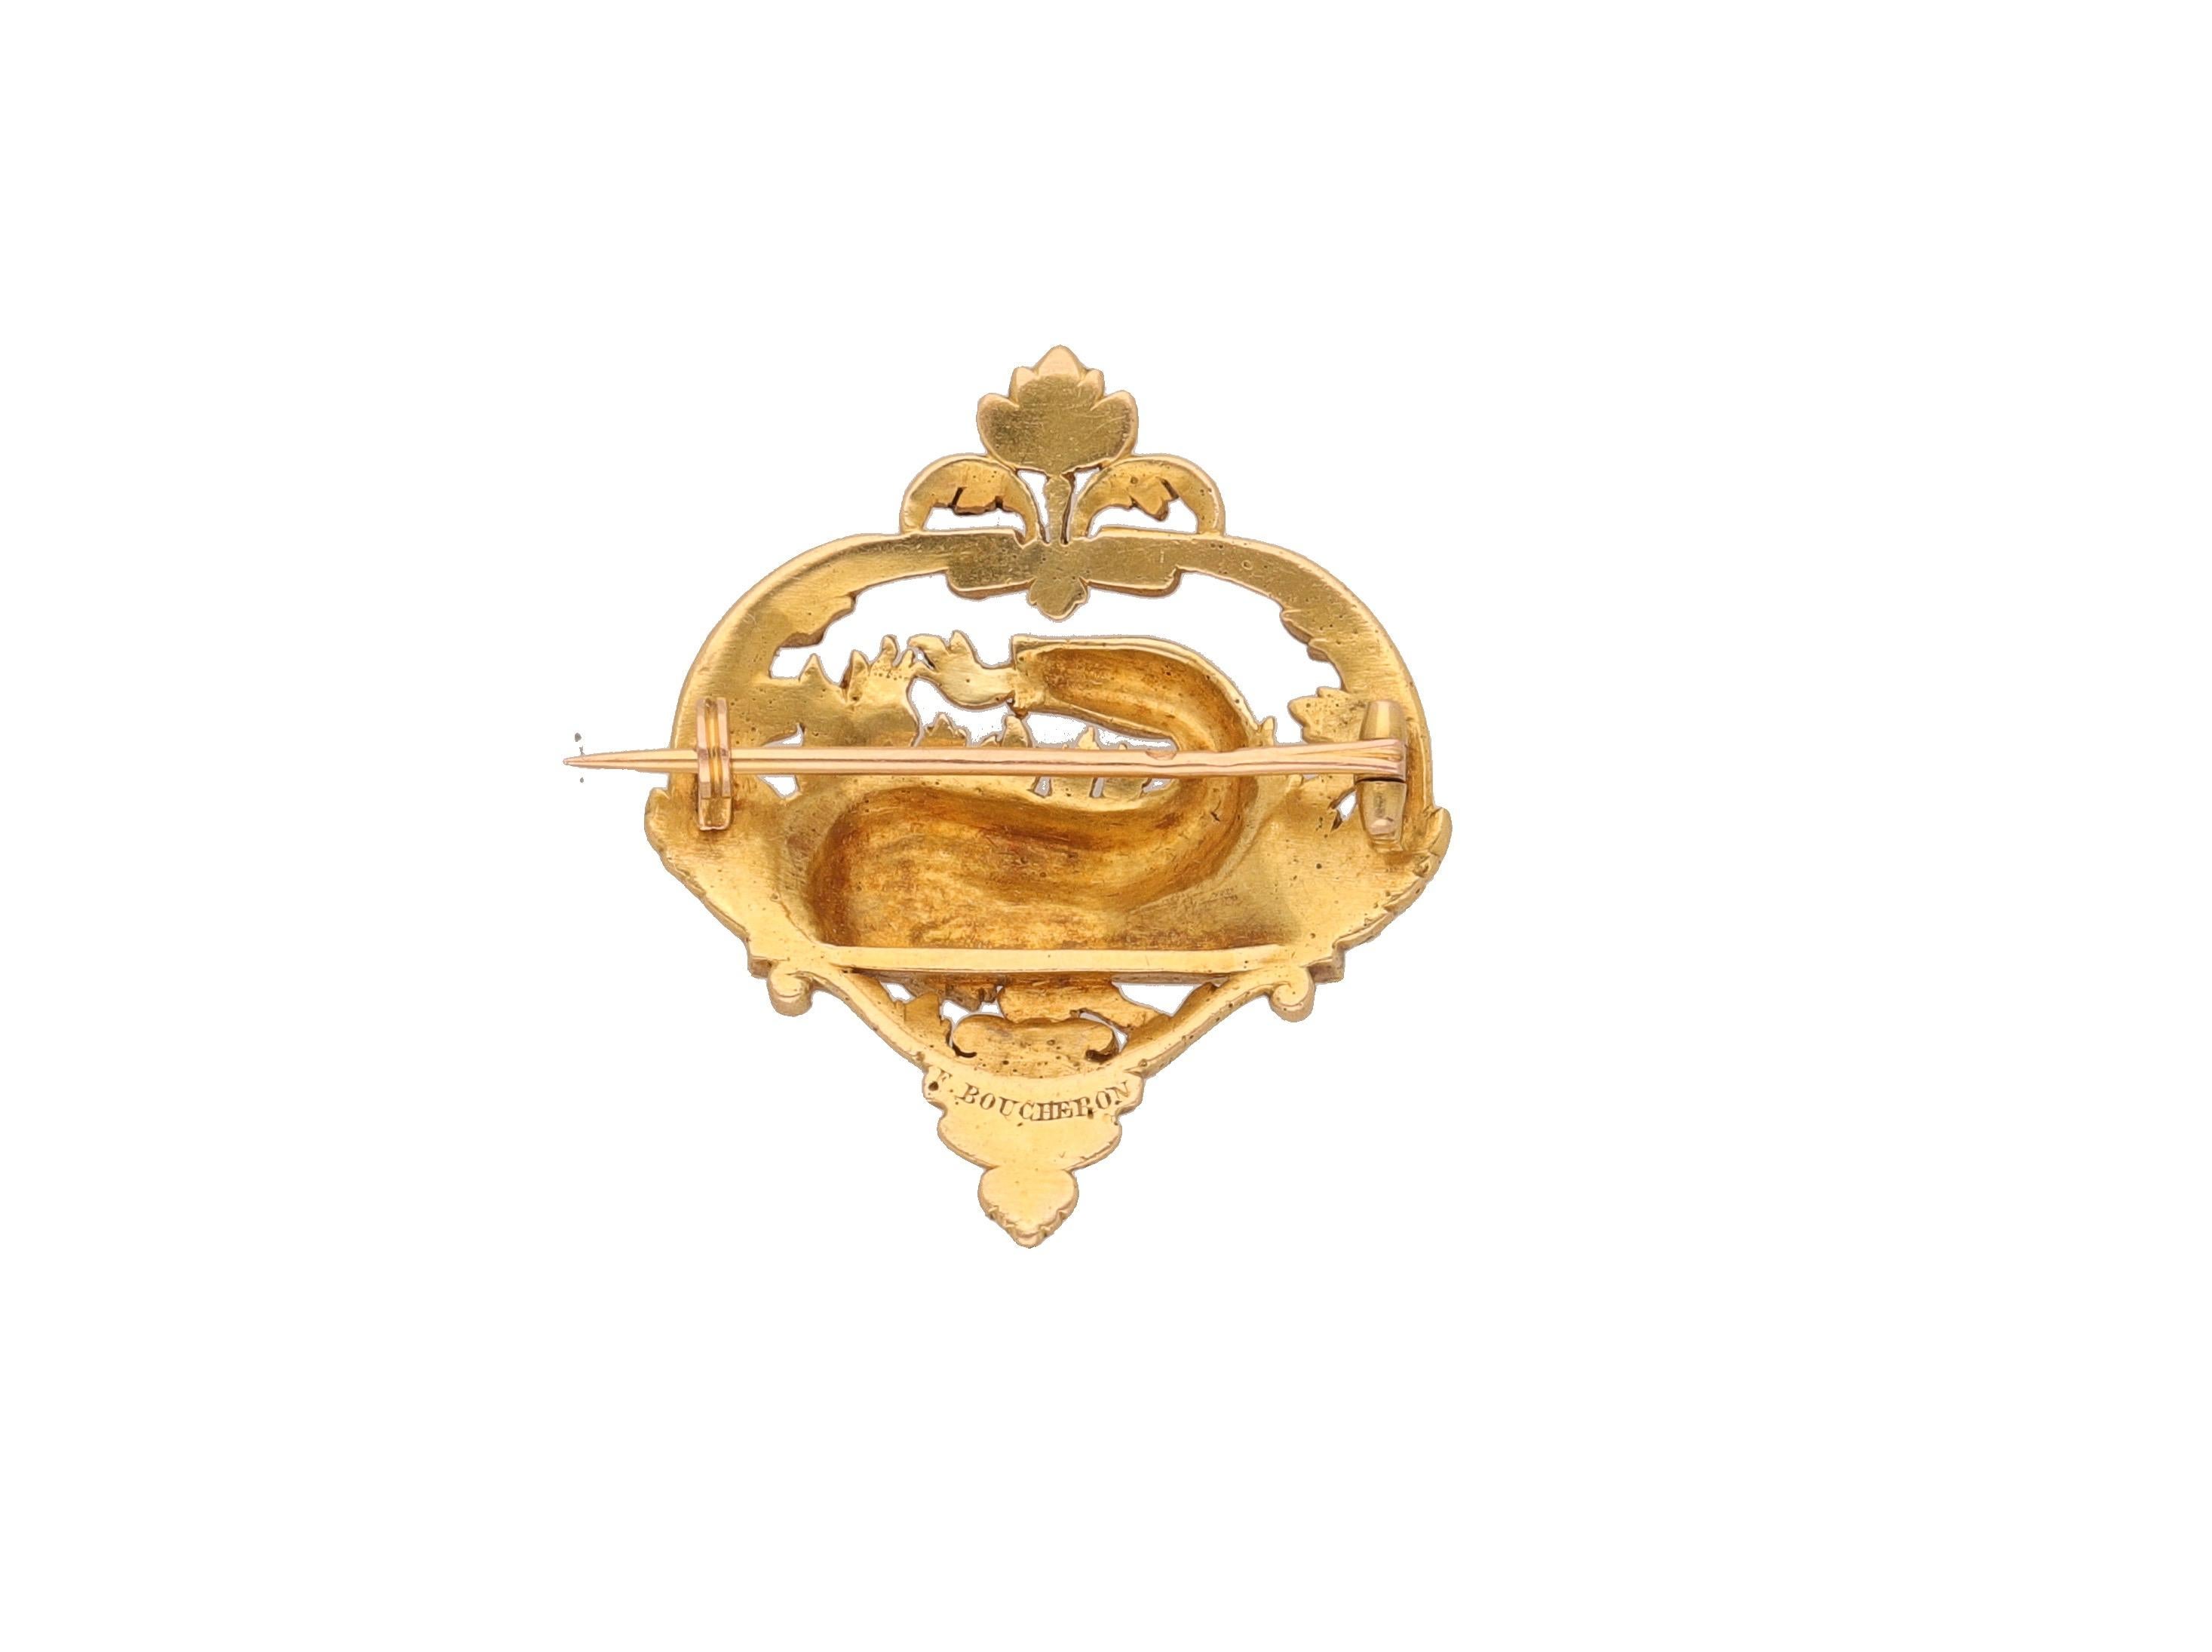 18 Kt. yellow gold brooch signed by Boucheron.
This brooch is 1930 ca.
The brooch symbolizes a dragon and is hand made.
